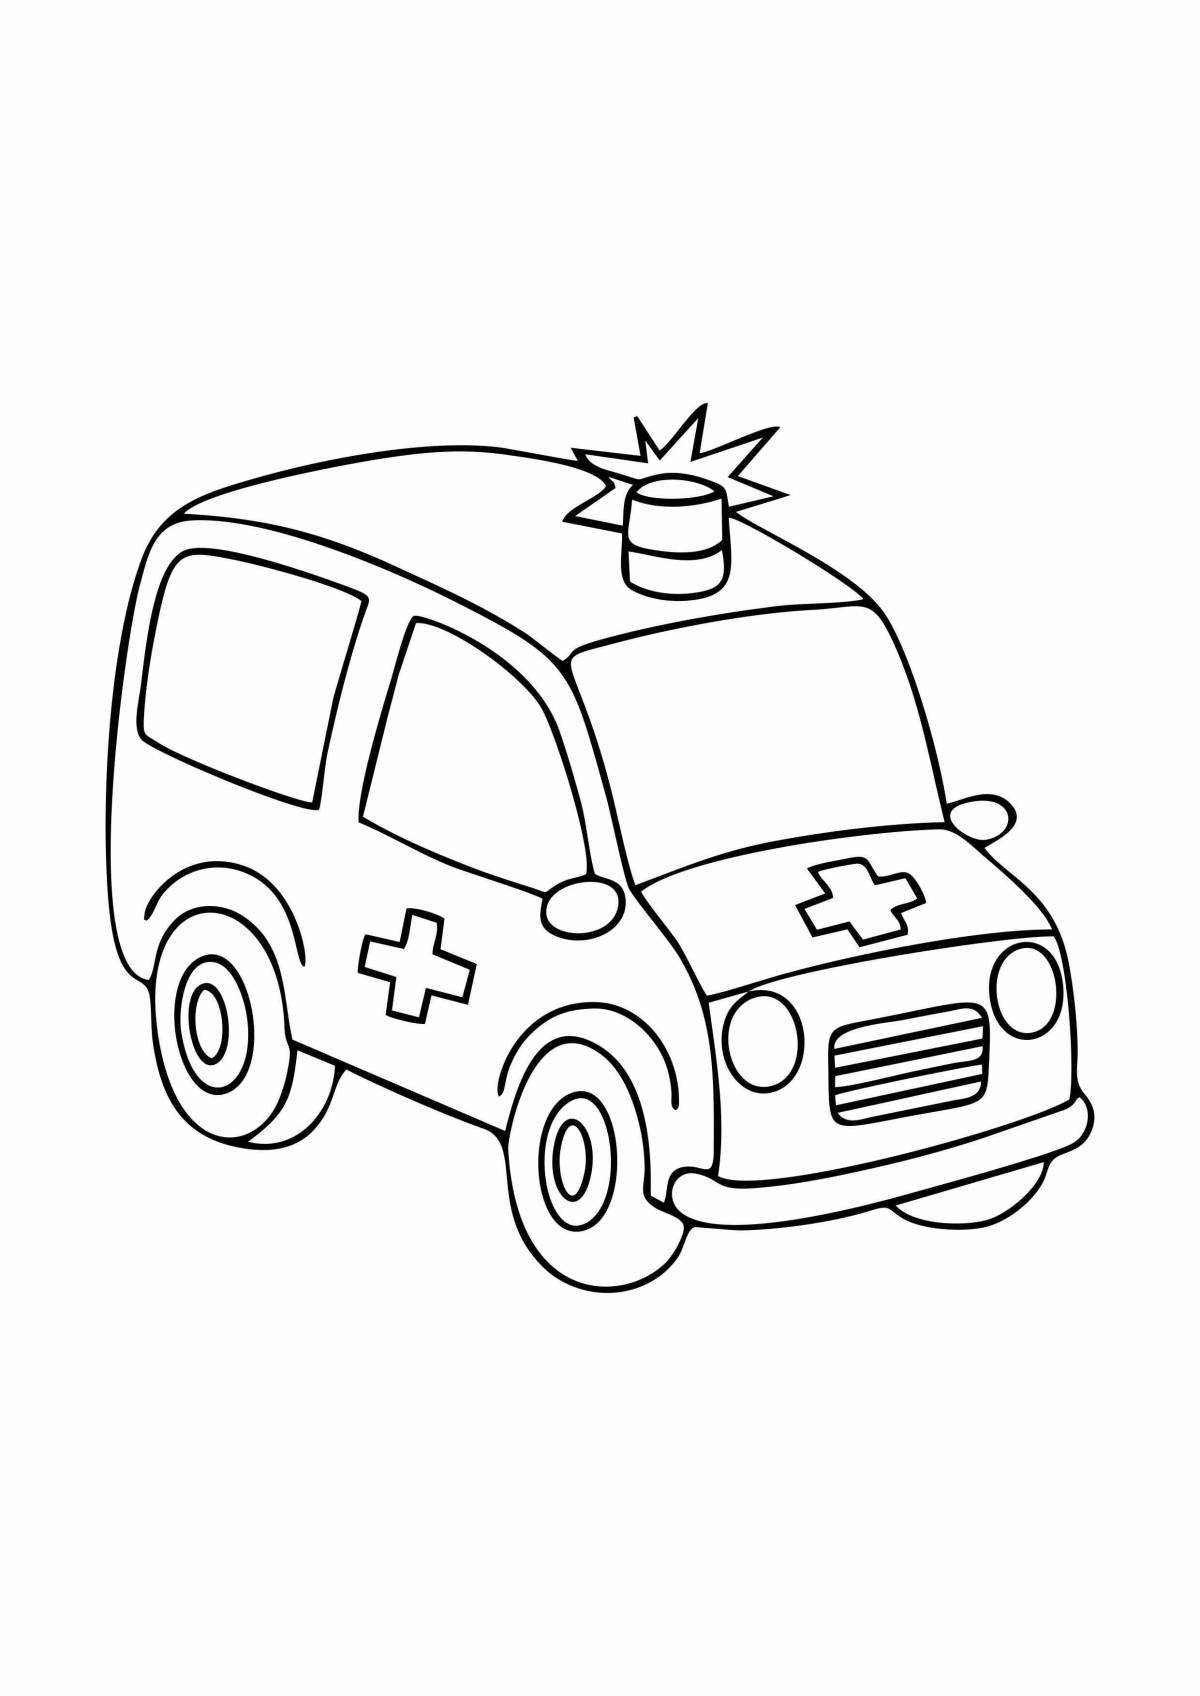 Adorable ambulance coloring book for 3-4 year olds